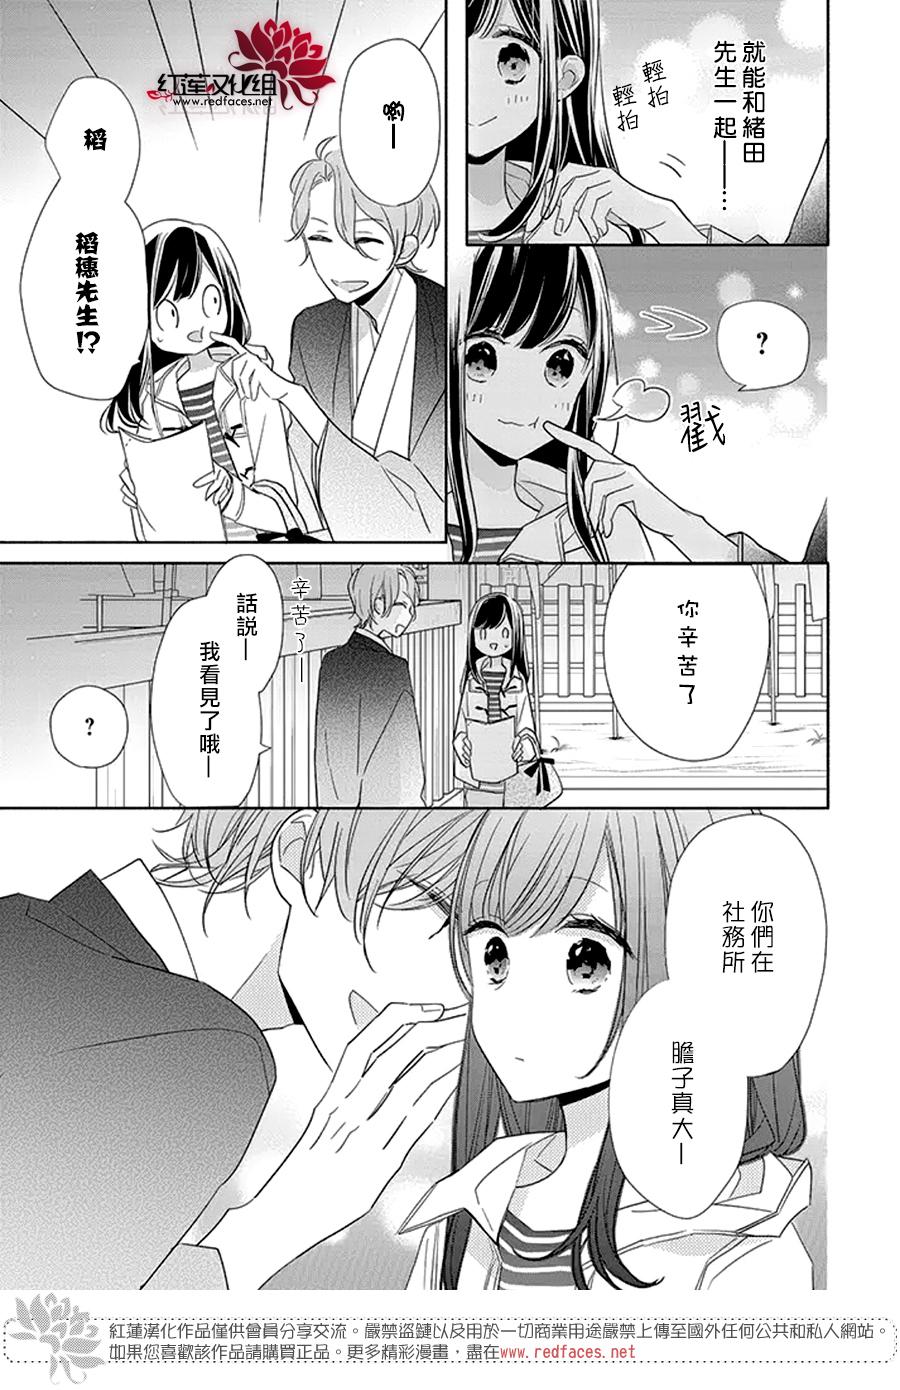 If given a second chance - 23话 - 1